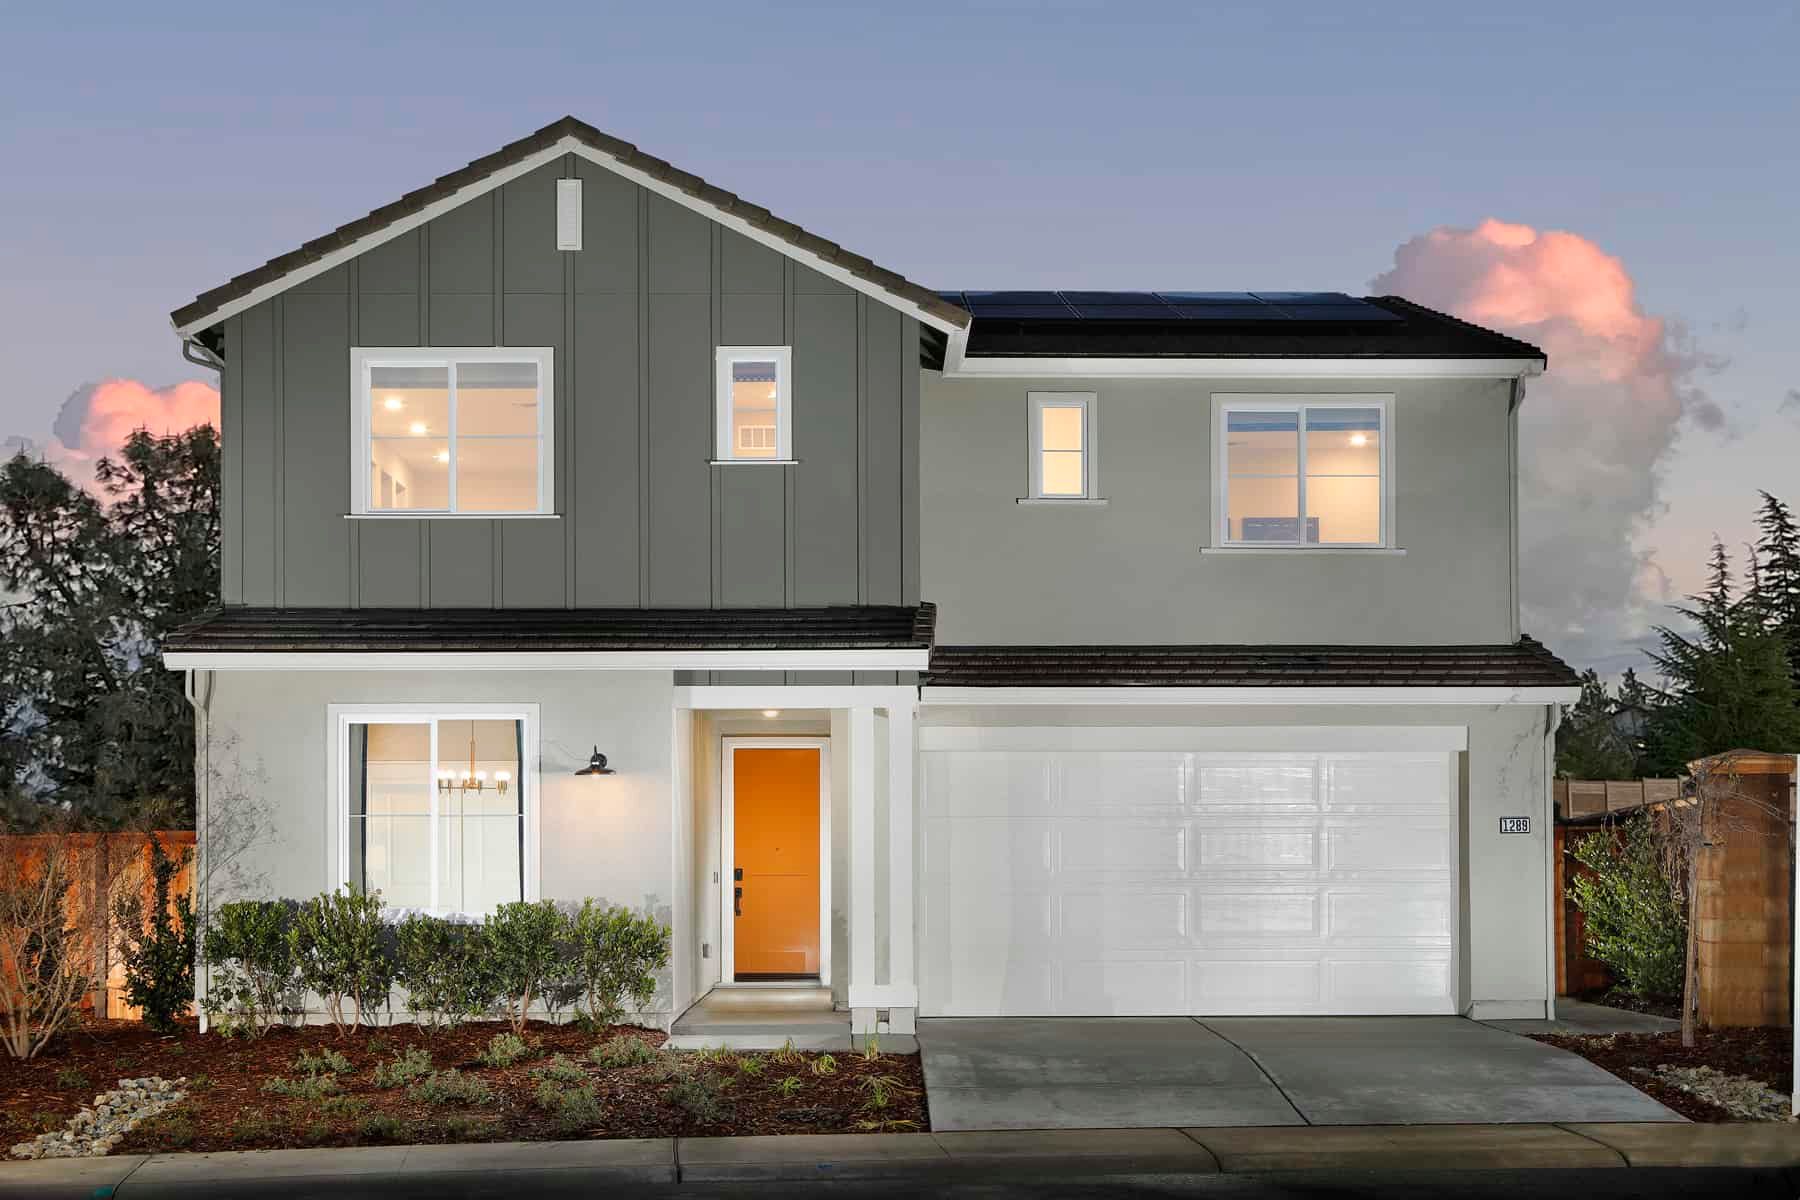 Edgelake At Serrano Models By Tri Pointe Homes, El:Commissioned by and Licensed solely to Tri Pointe Homes.